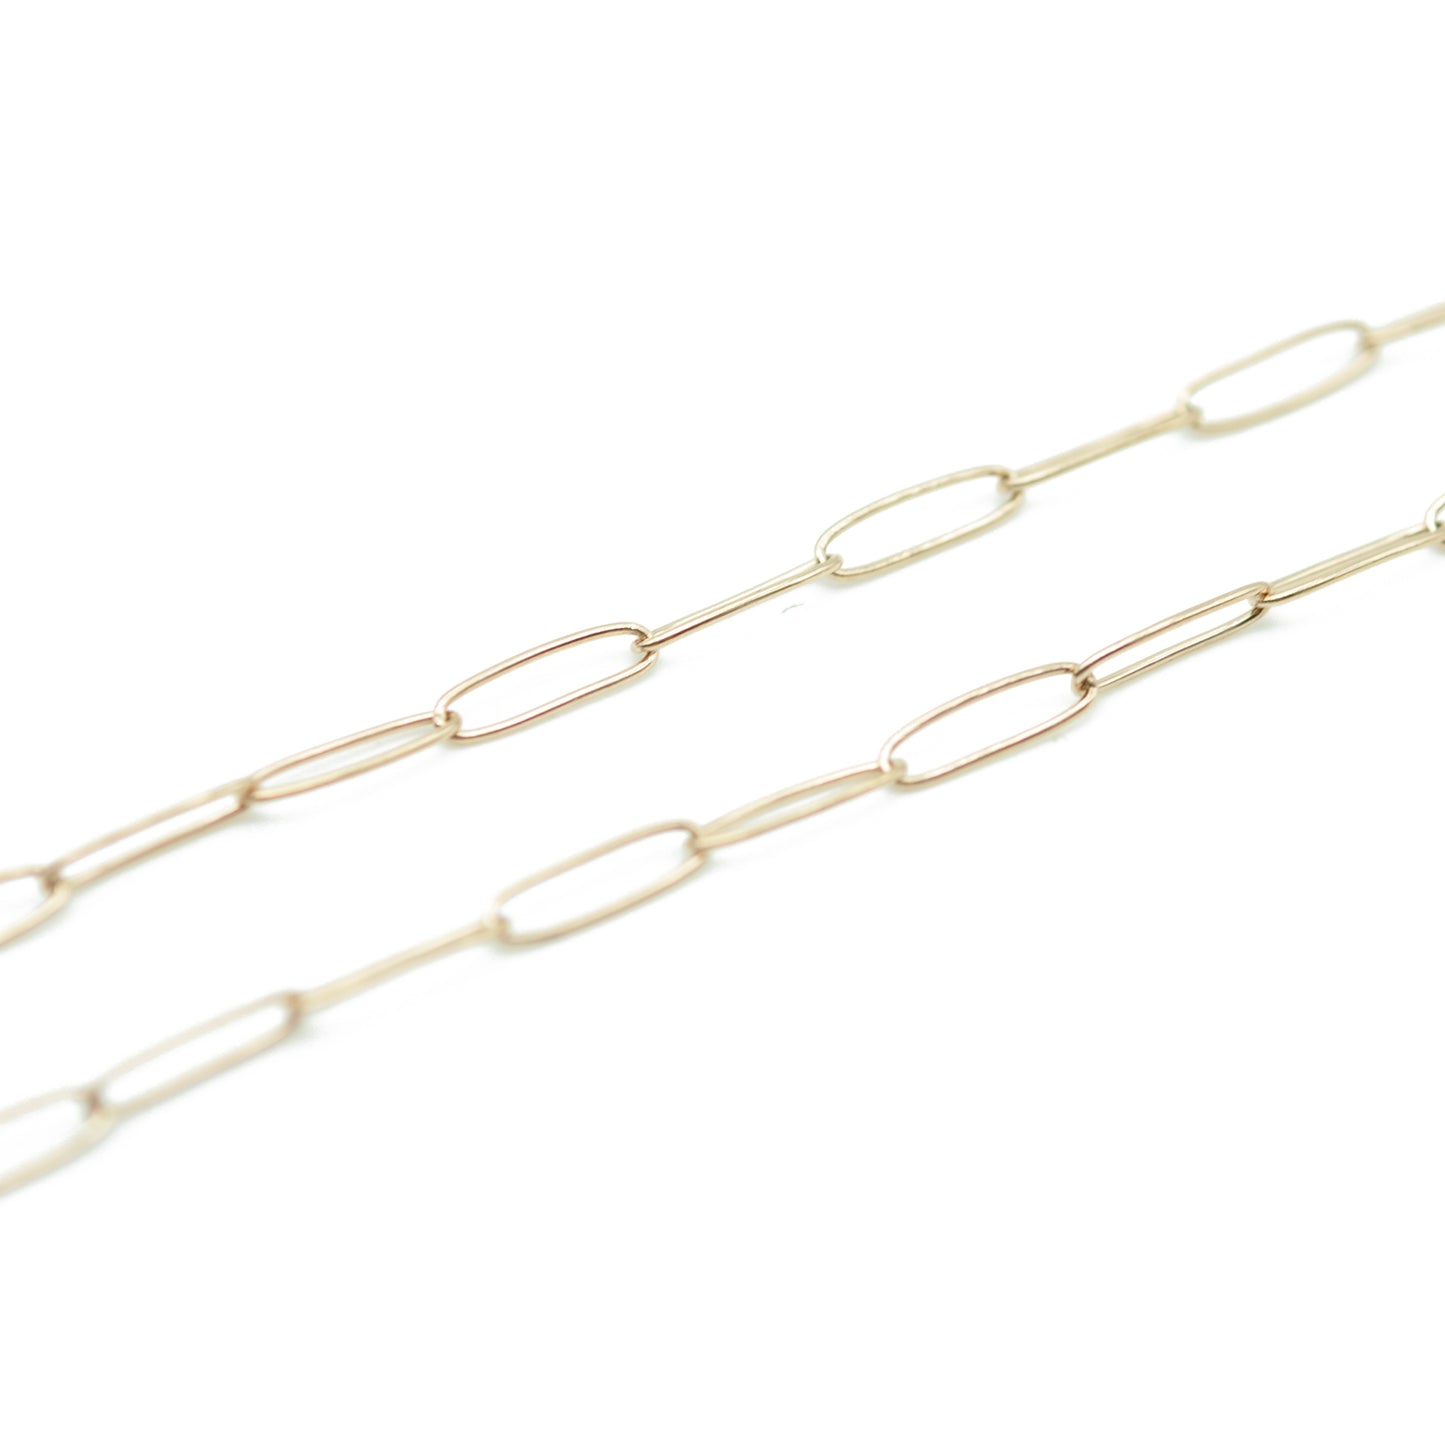 Delicate paper clip stainless steel chain / rose gold plated / 9 x 2.6 mm